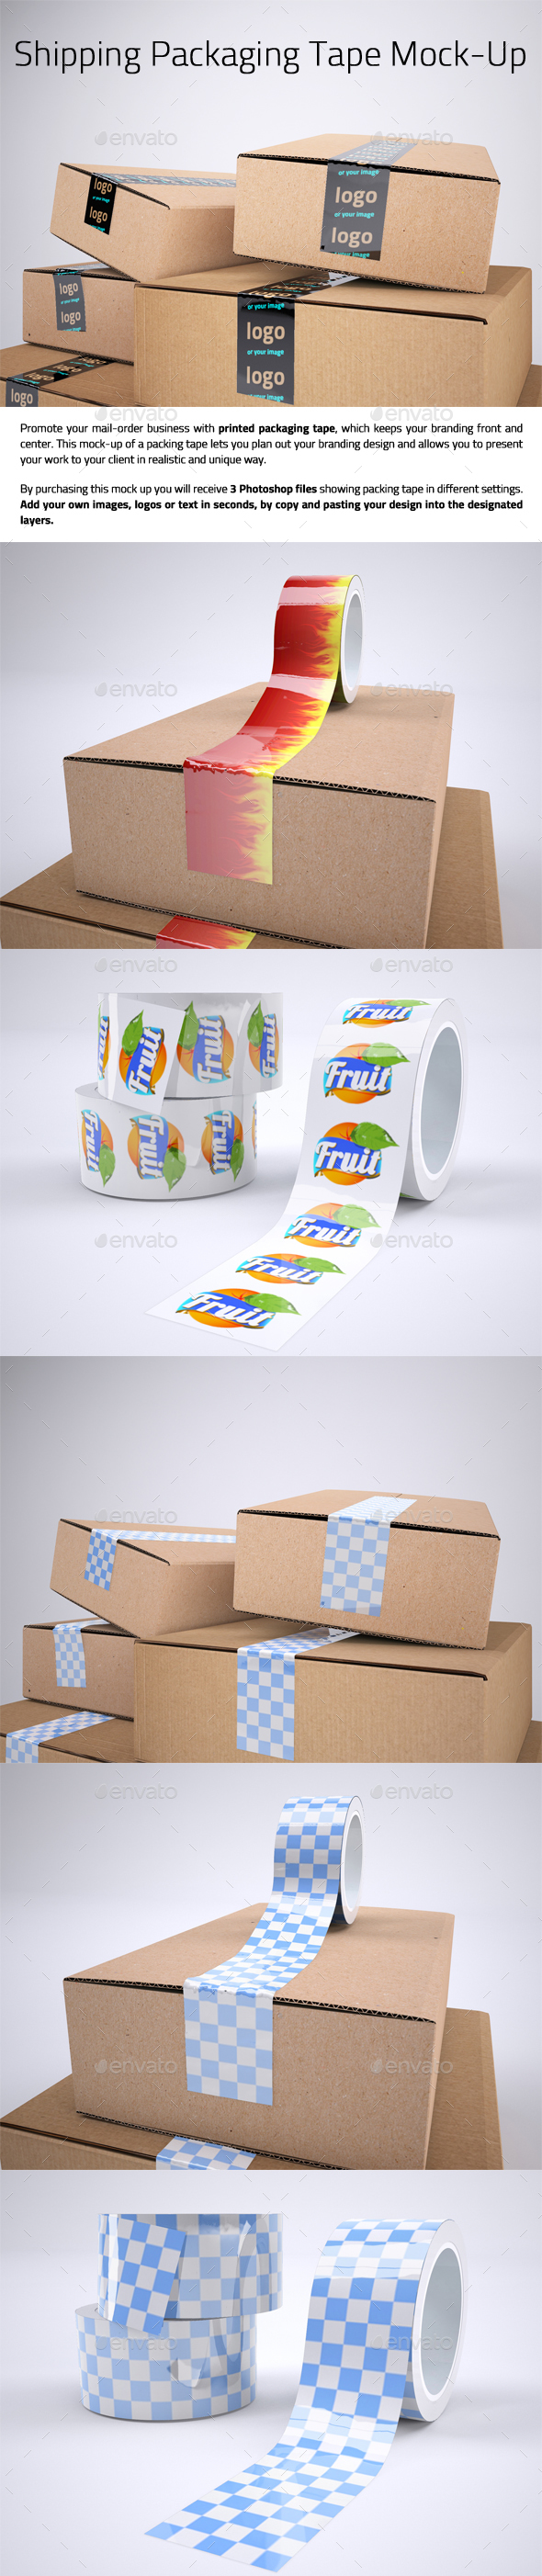 Shipping Packaging Tape Mock-Up